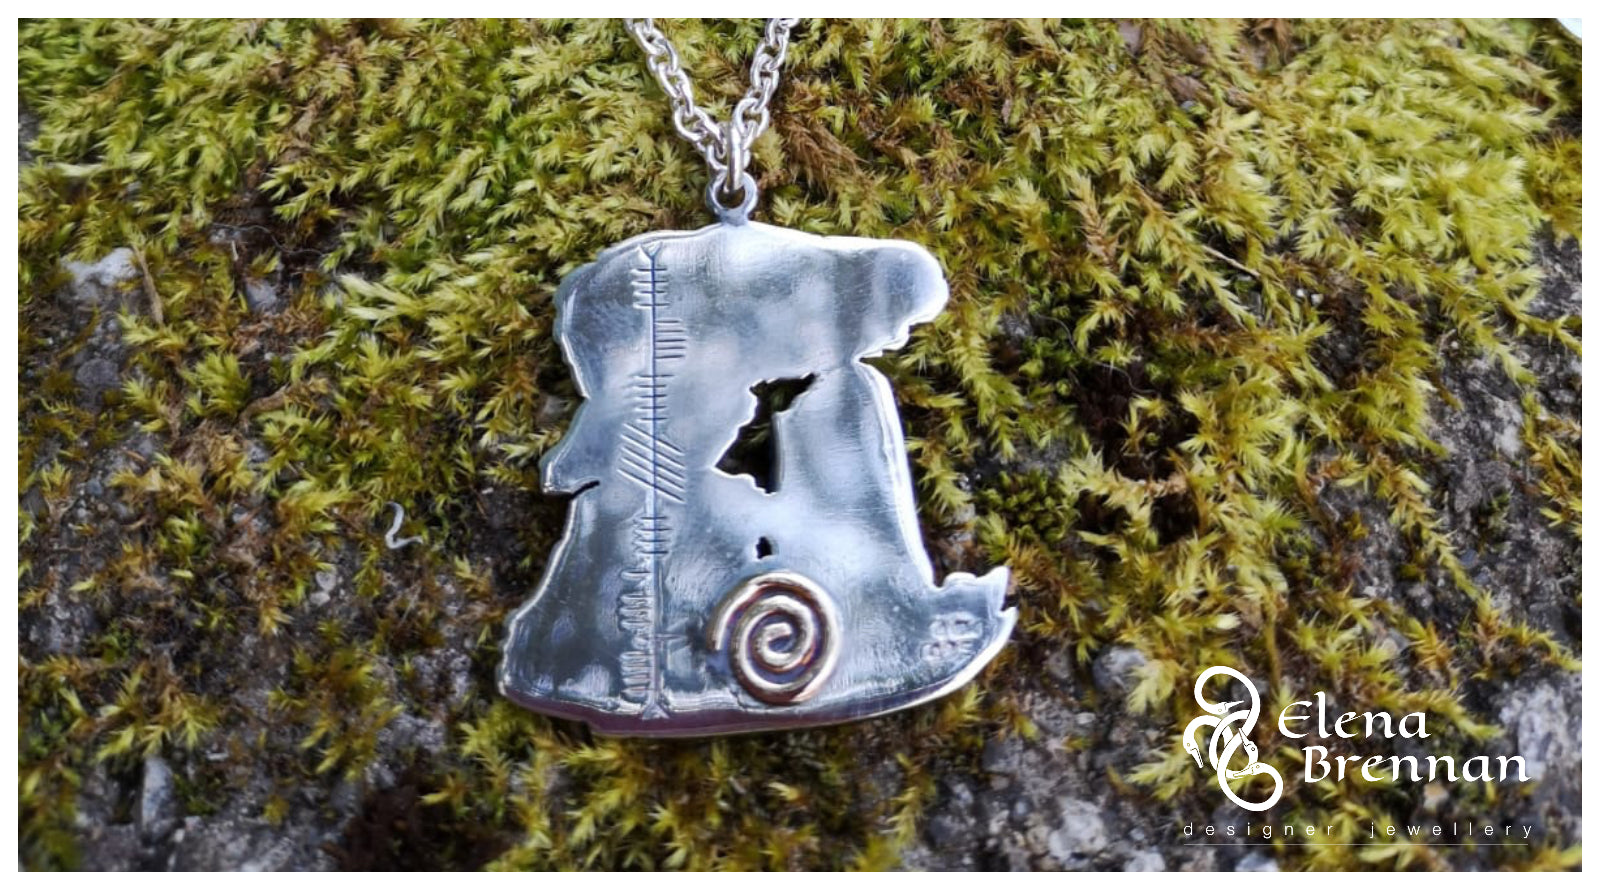 The Luna Goddess Spiral and Ogham writing is incorporated into the design.